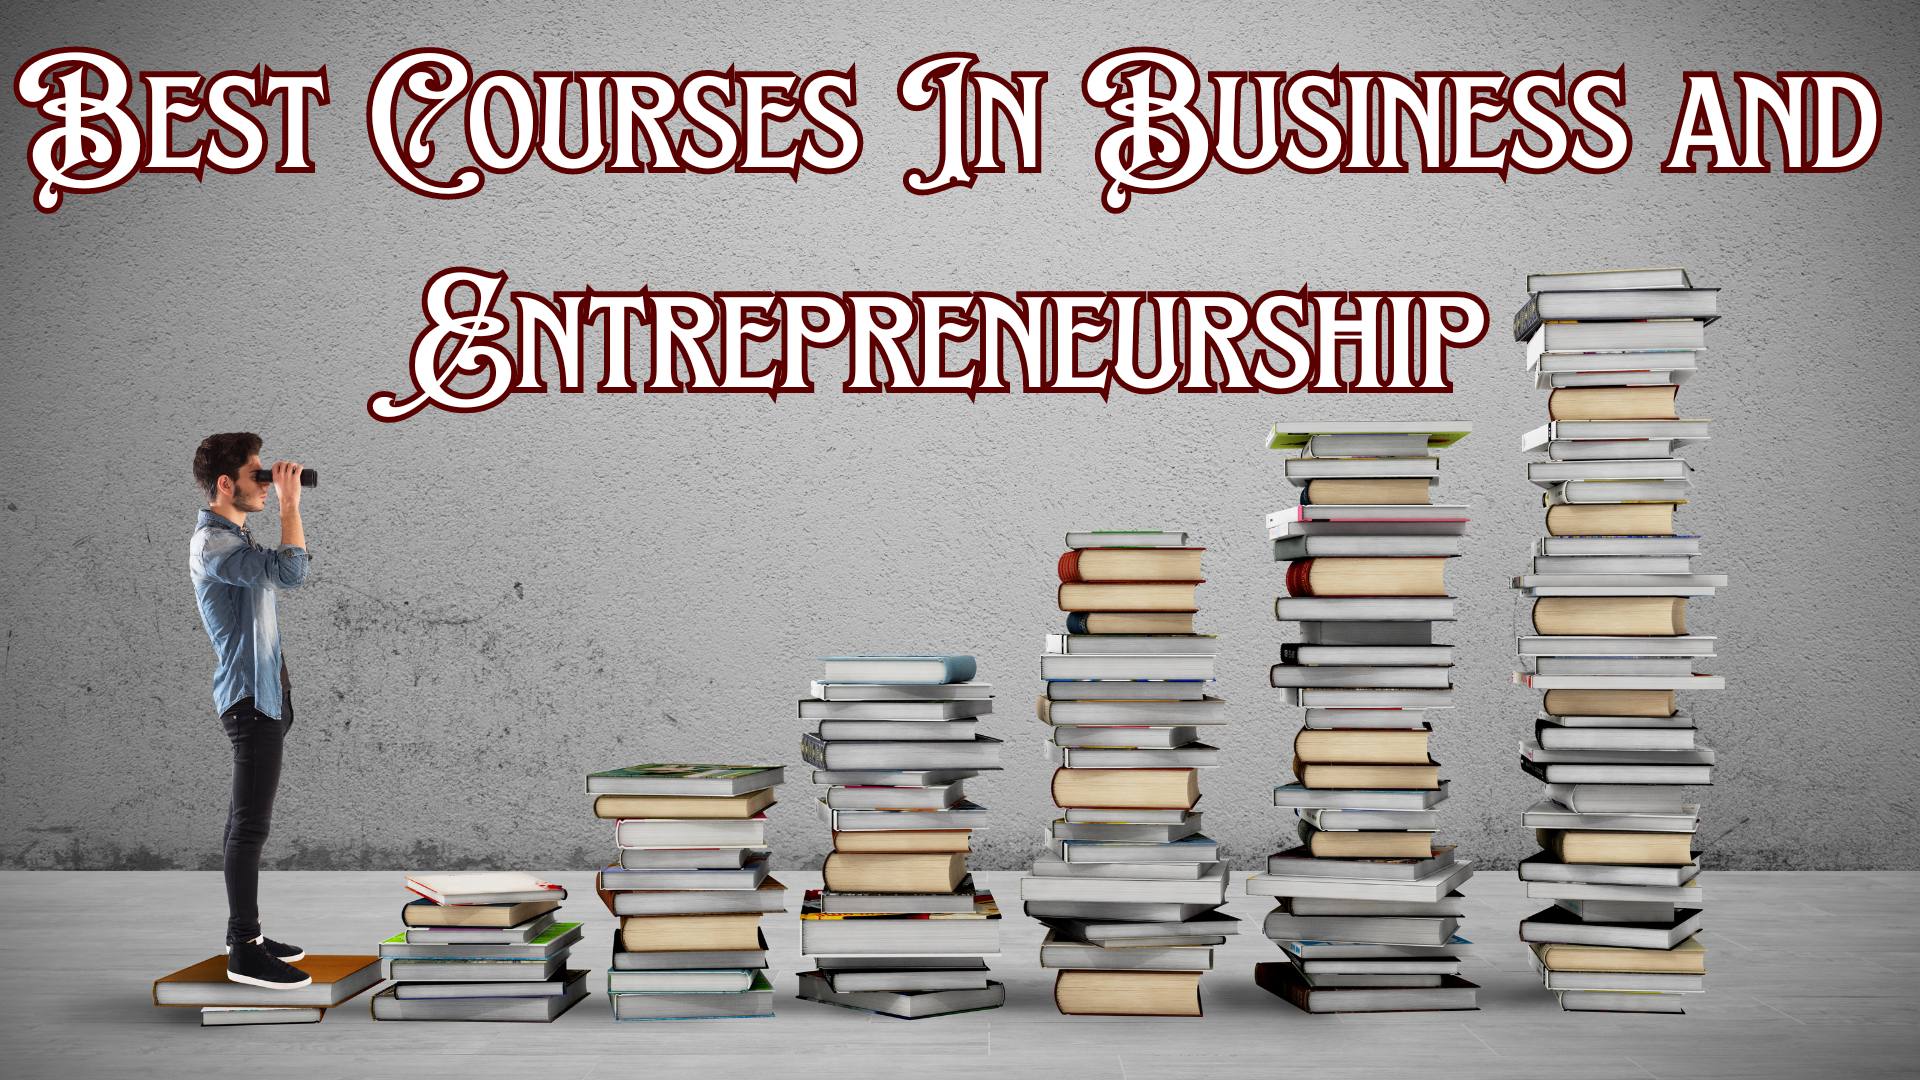 Best Courses In Business, Buzzonnet